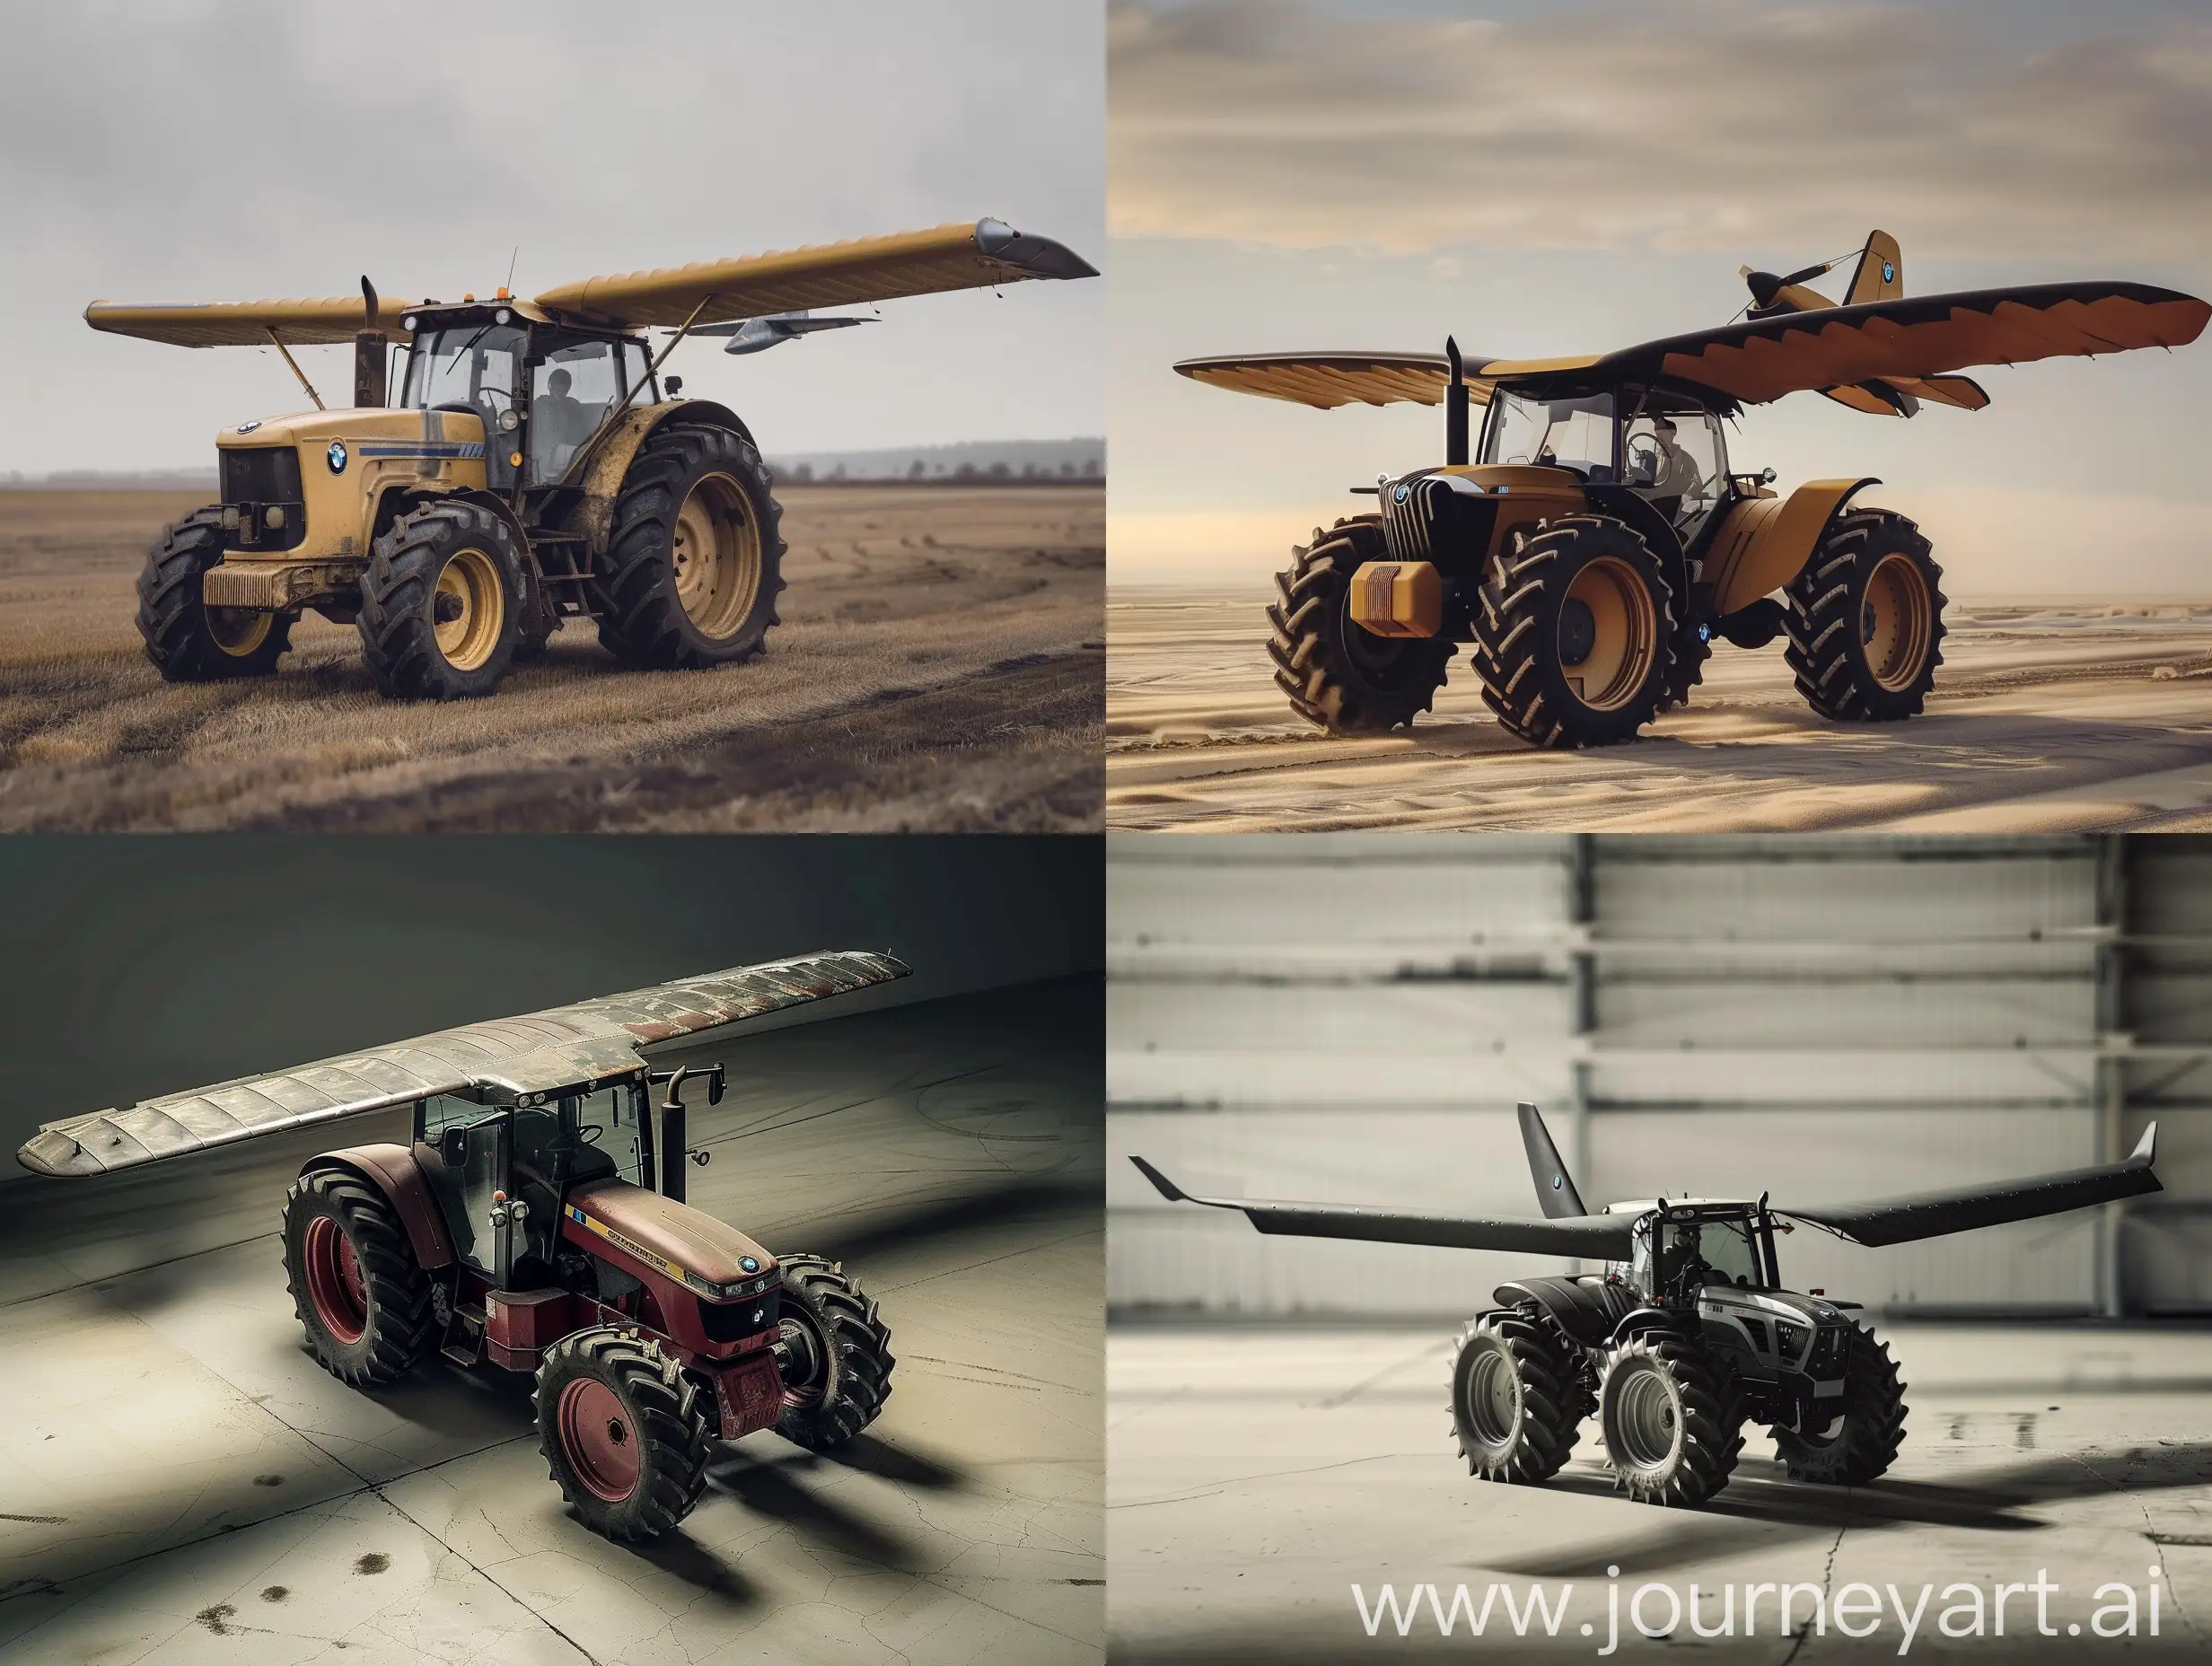 Breathtaking-Bmw-Tractor-with-Airplane-Wings-Artwork